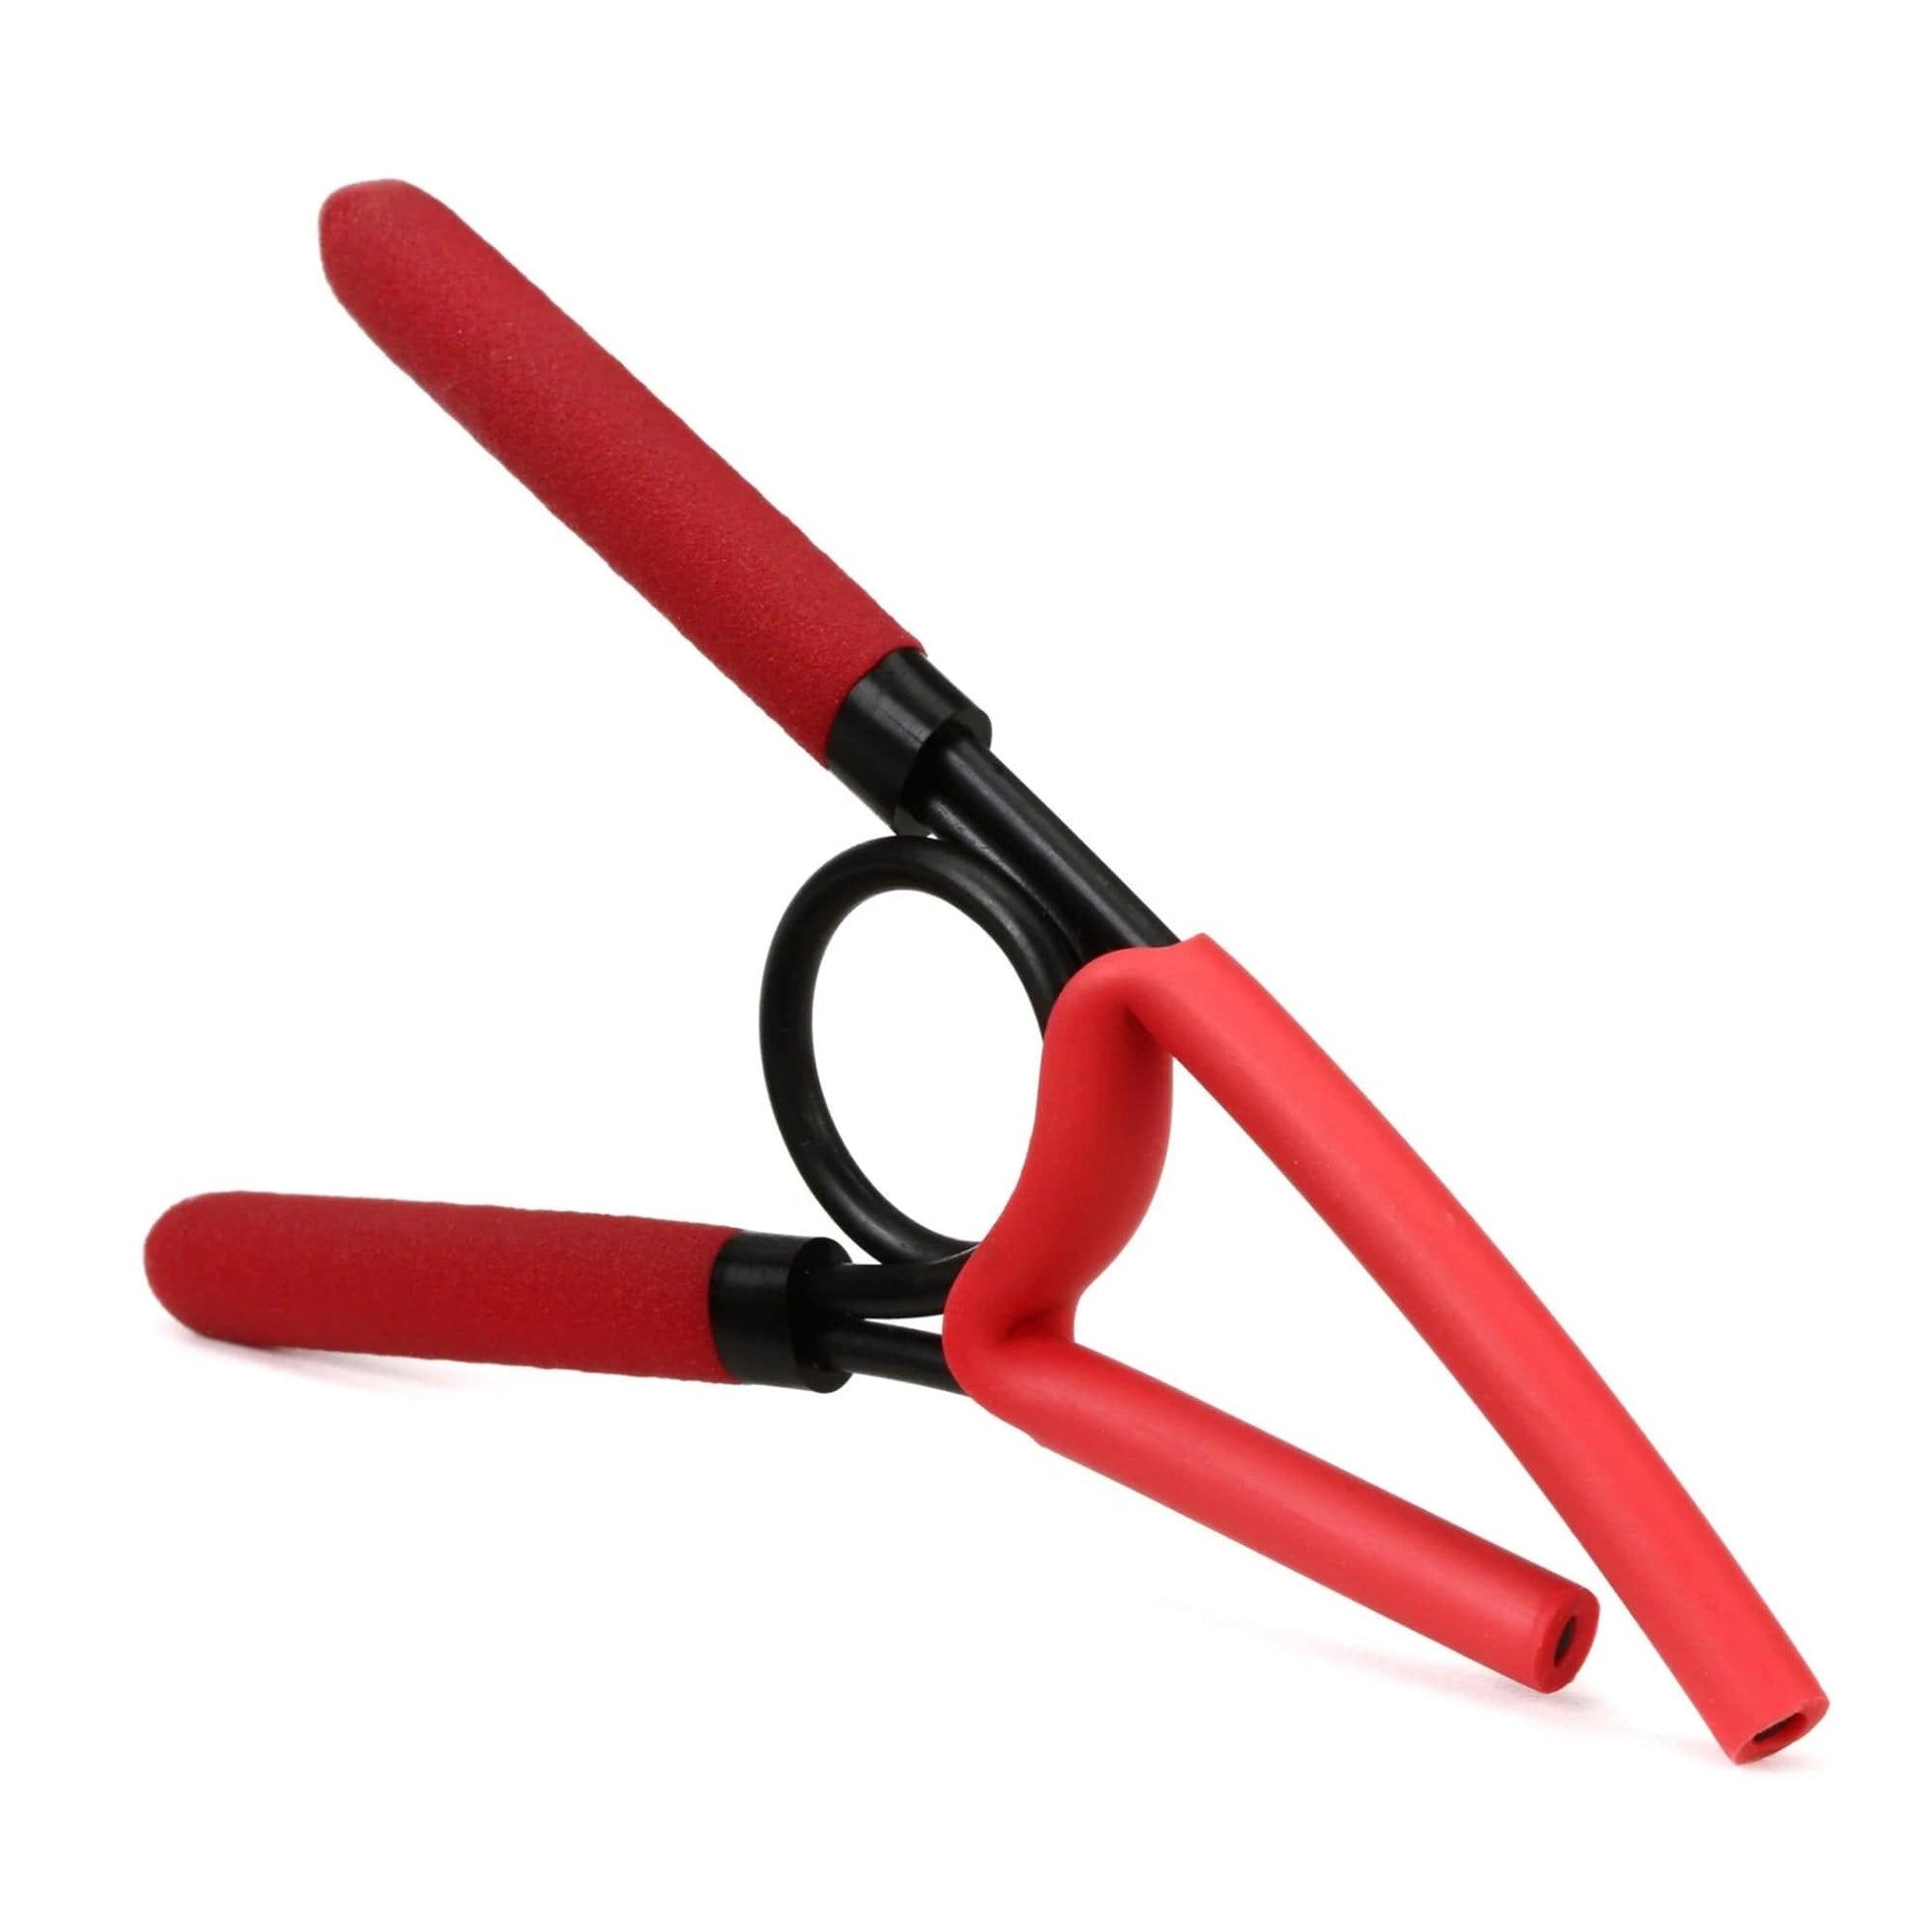 Paige PSC Spring Capo Red Accessories / Capos